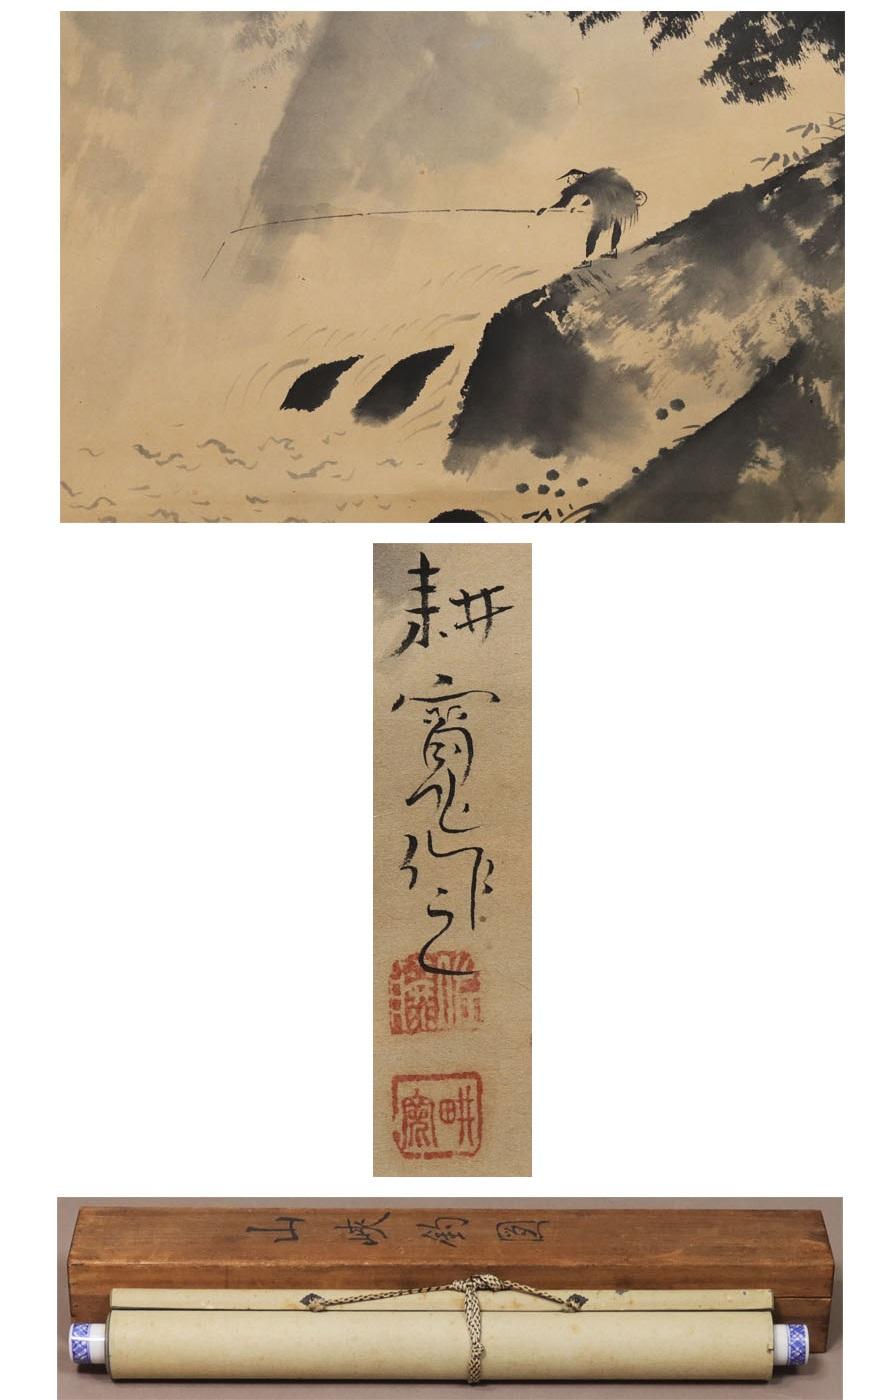 Japanese Painting 20th Scroll by Kouhiro Sato Nihonga Landscape Mountain Fishing In Good Condition For Sale In Amsterdam, Noord Holland